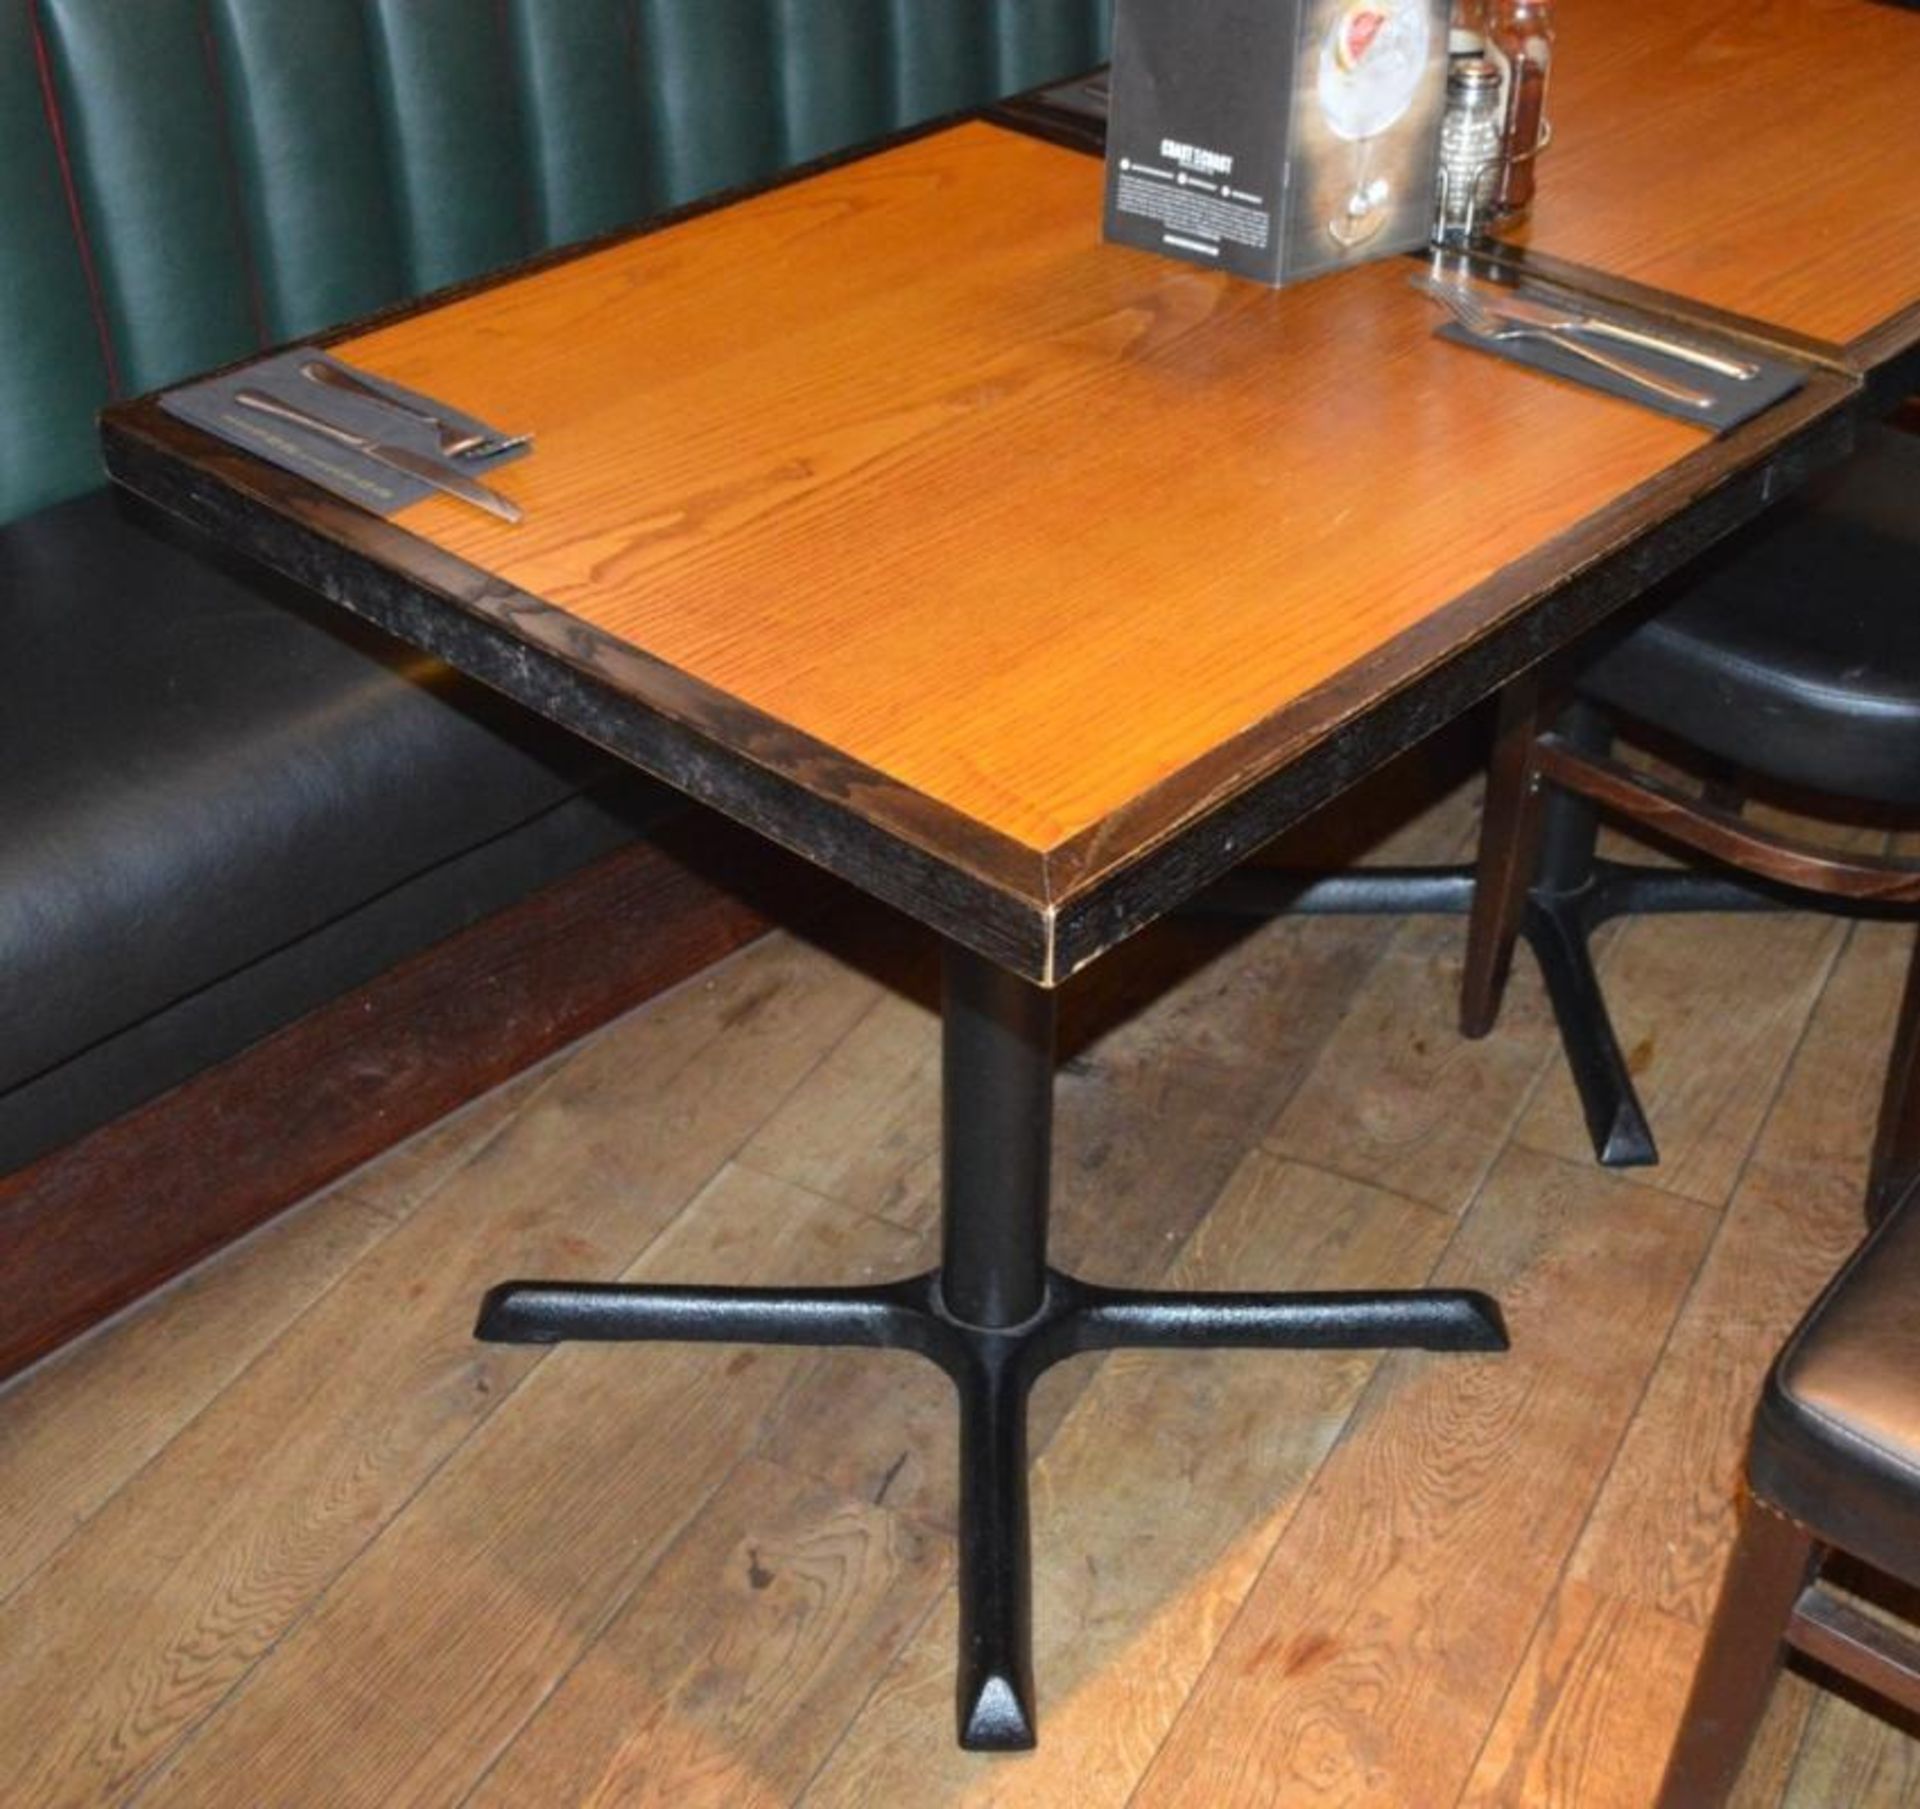 12 x Restaurant Dining Tables With Cast Iron Bases - Two Tone Wooden Finish With Shaped or Curved